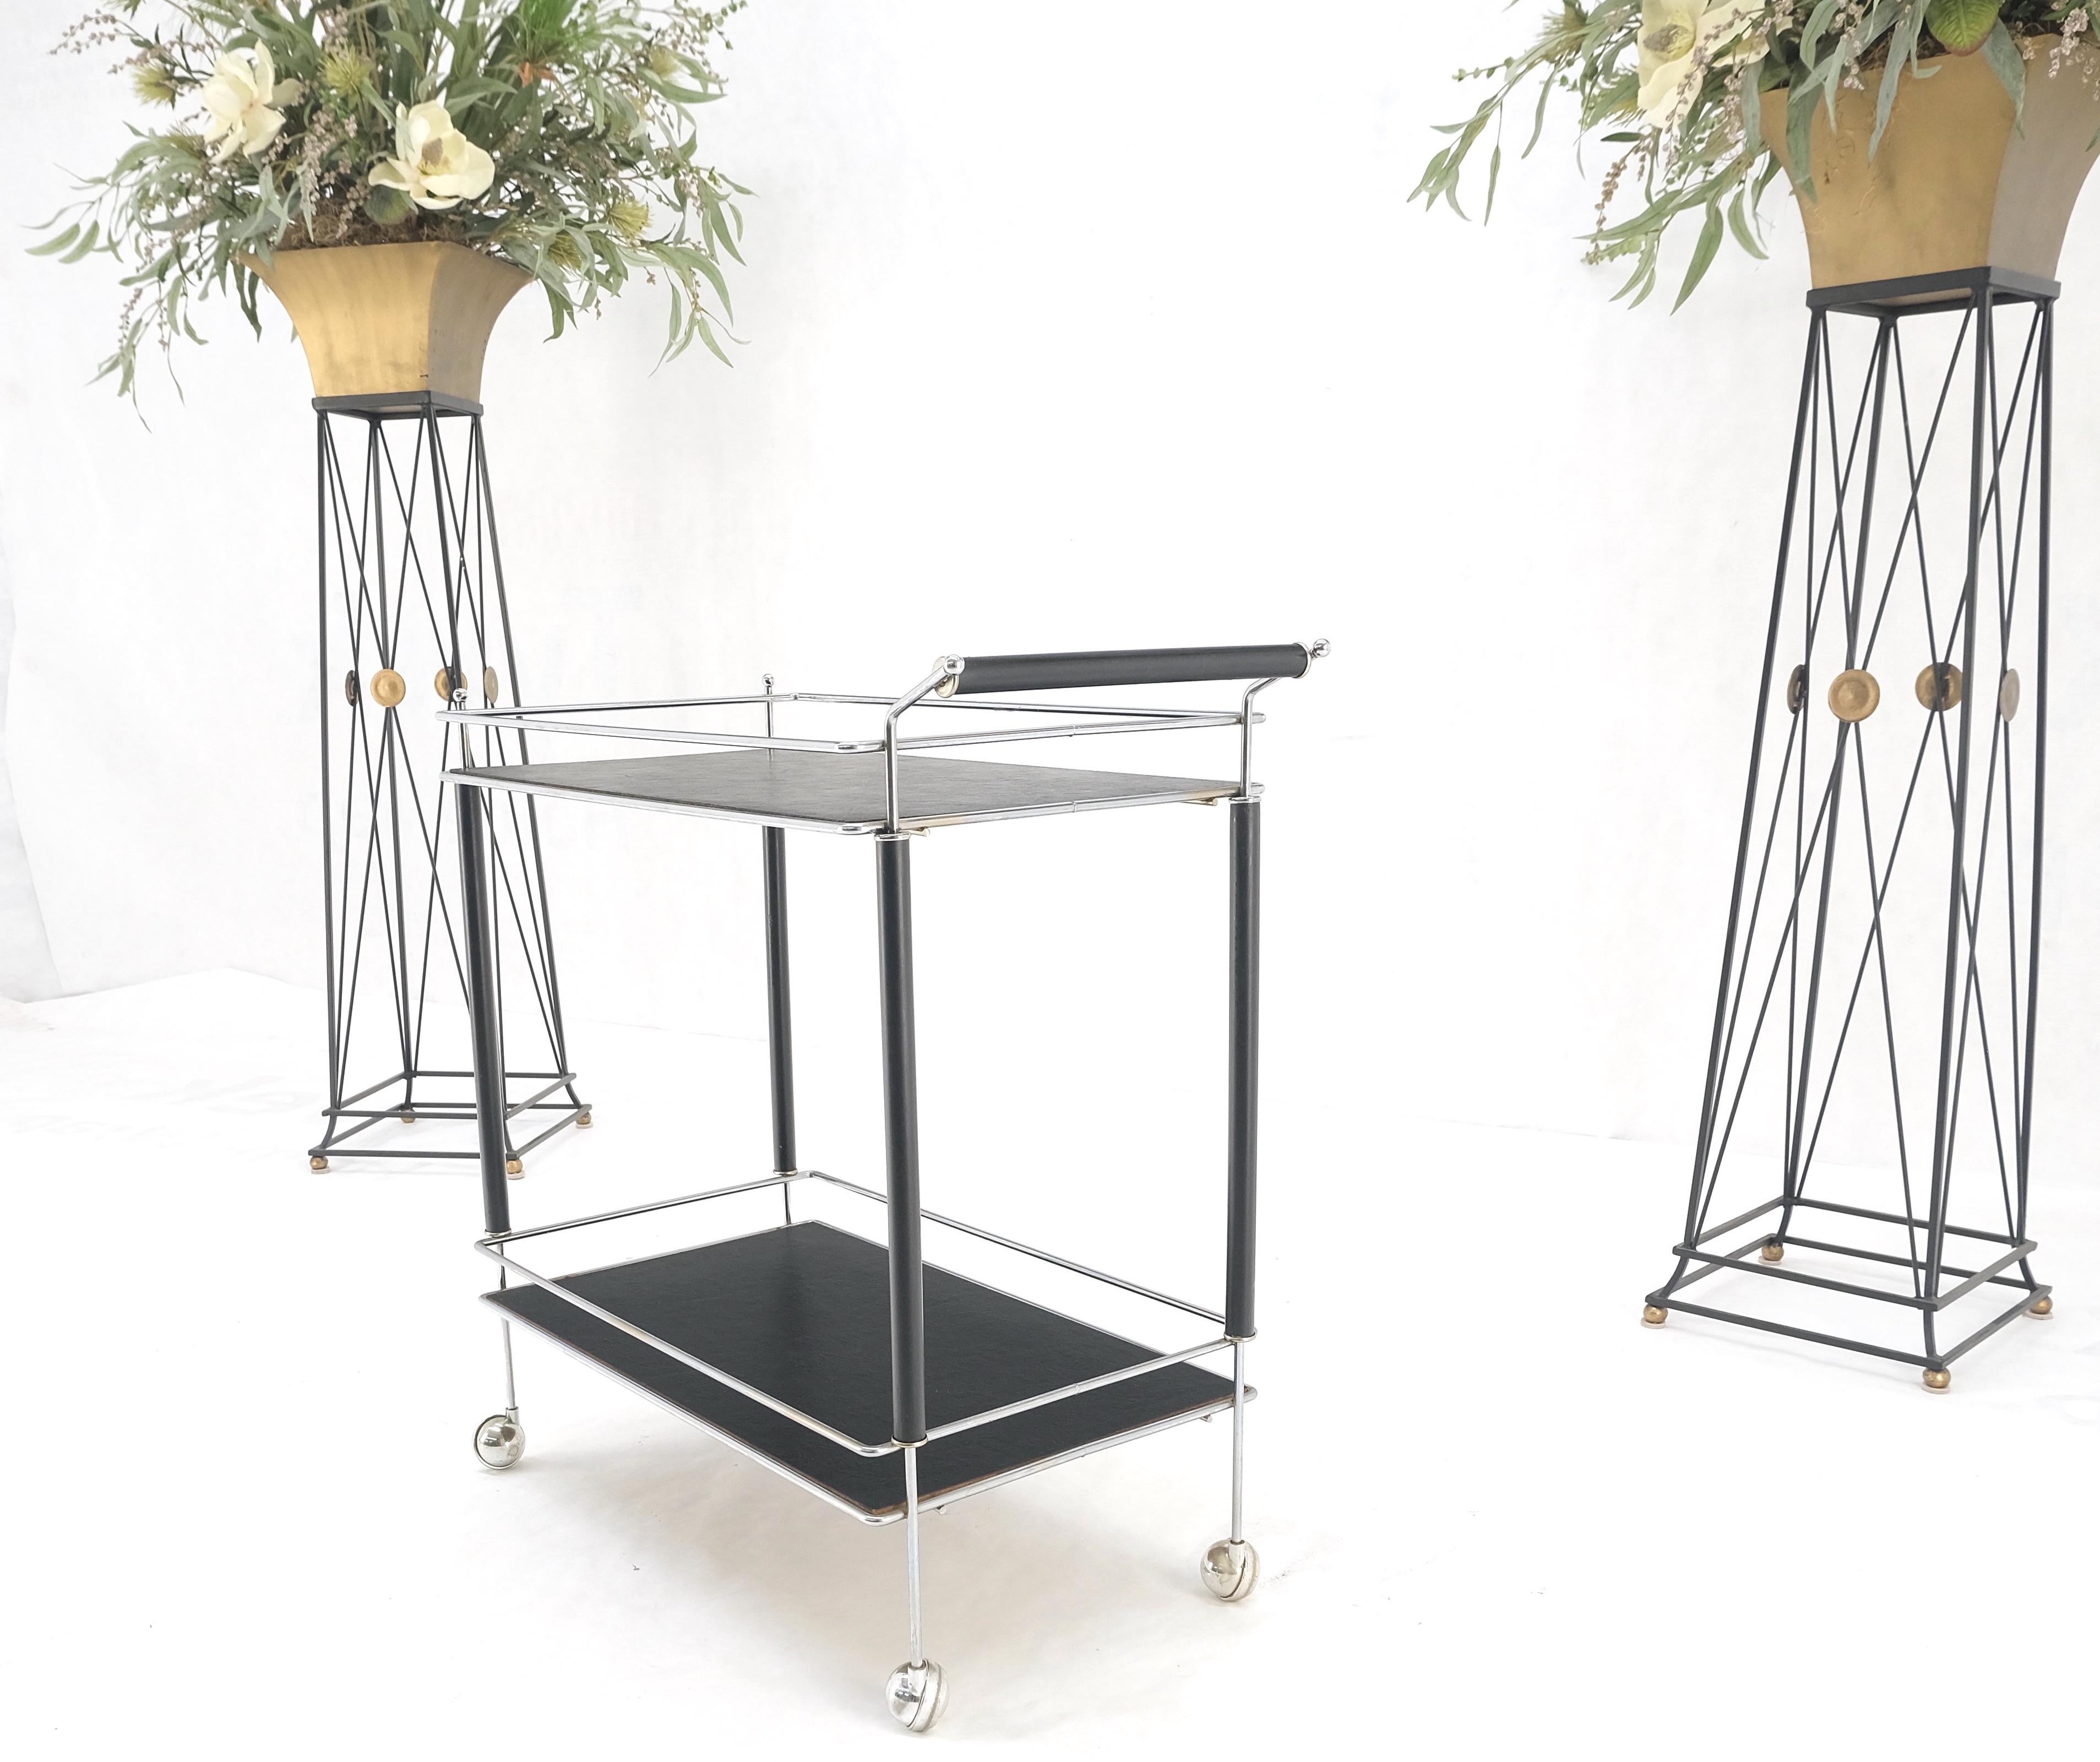 Black Lacquer & Chrome Bauhaus Two Tier Serving Cart on Wheels  c.1940s MINT  In Good Condition For Sale In Rockaway, NJ